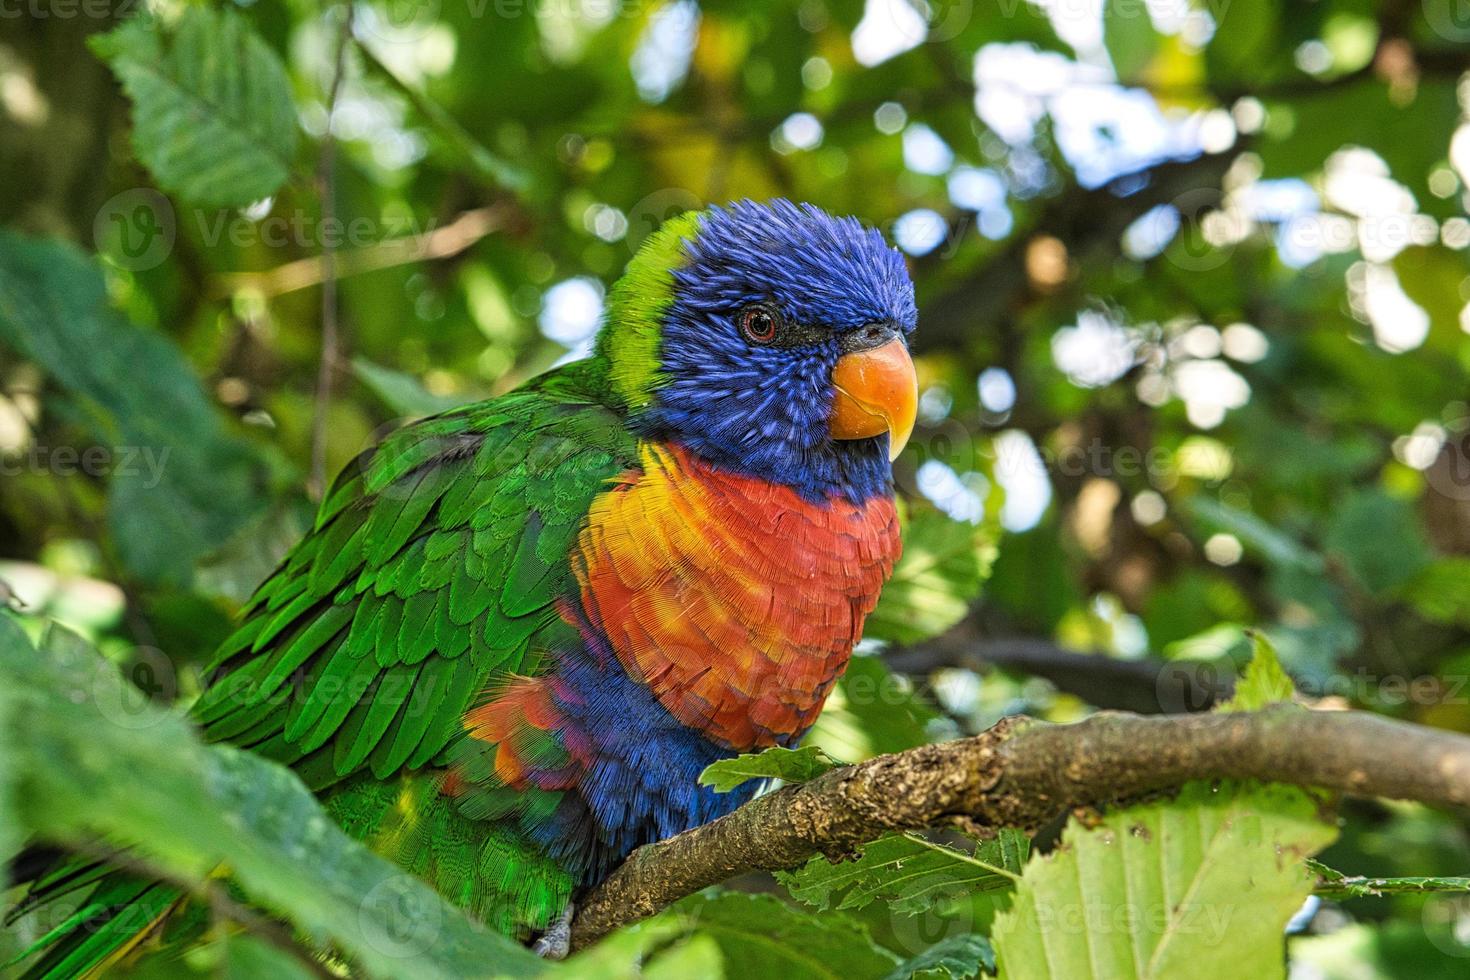 lori in foliage, colorful parrot species. photo